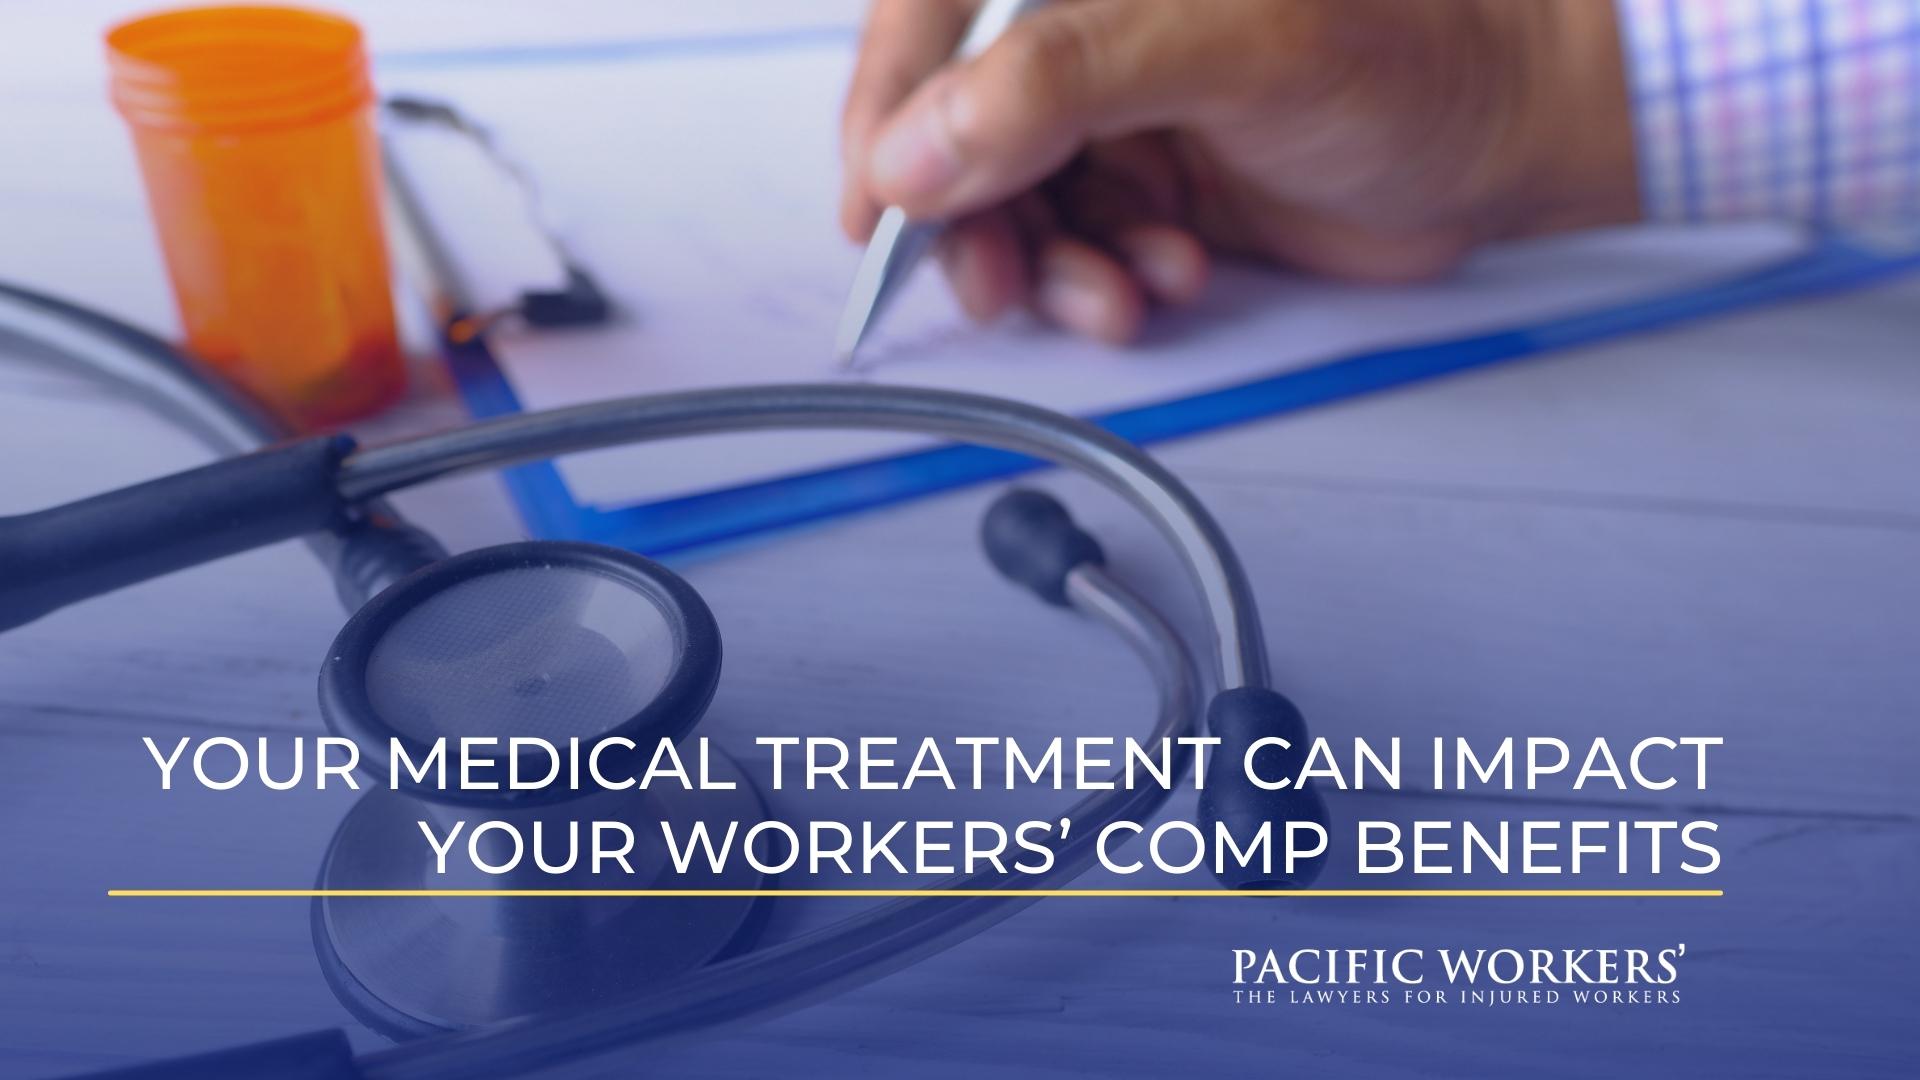 Your Medical Treatment Can Impact Your Workers’ Comp Benefits